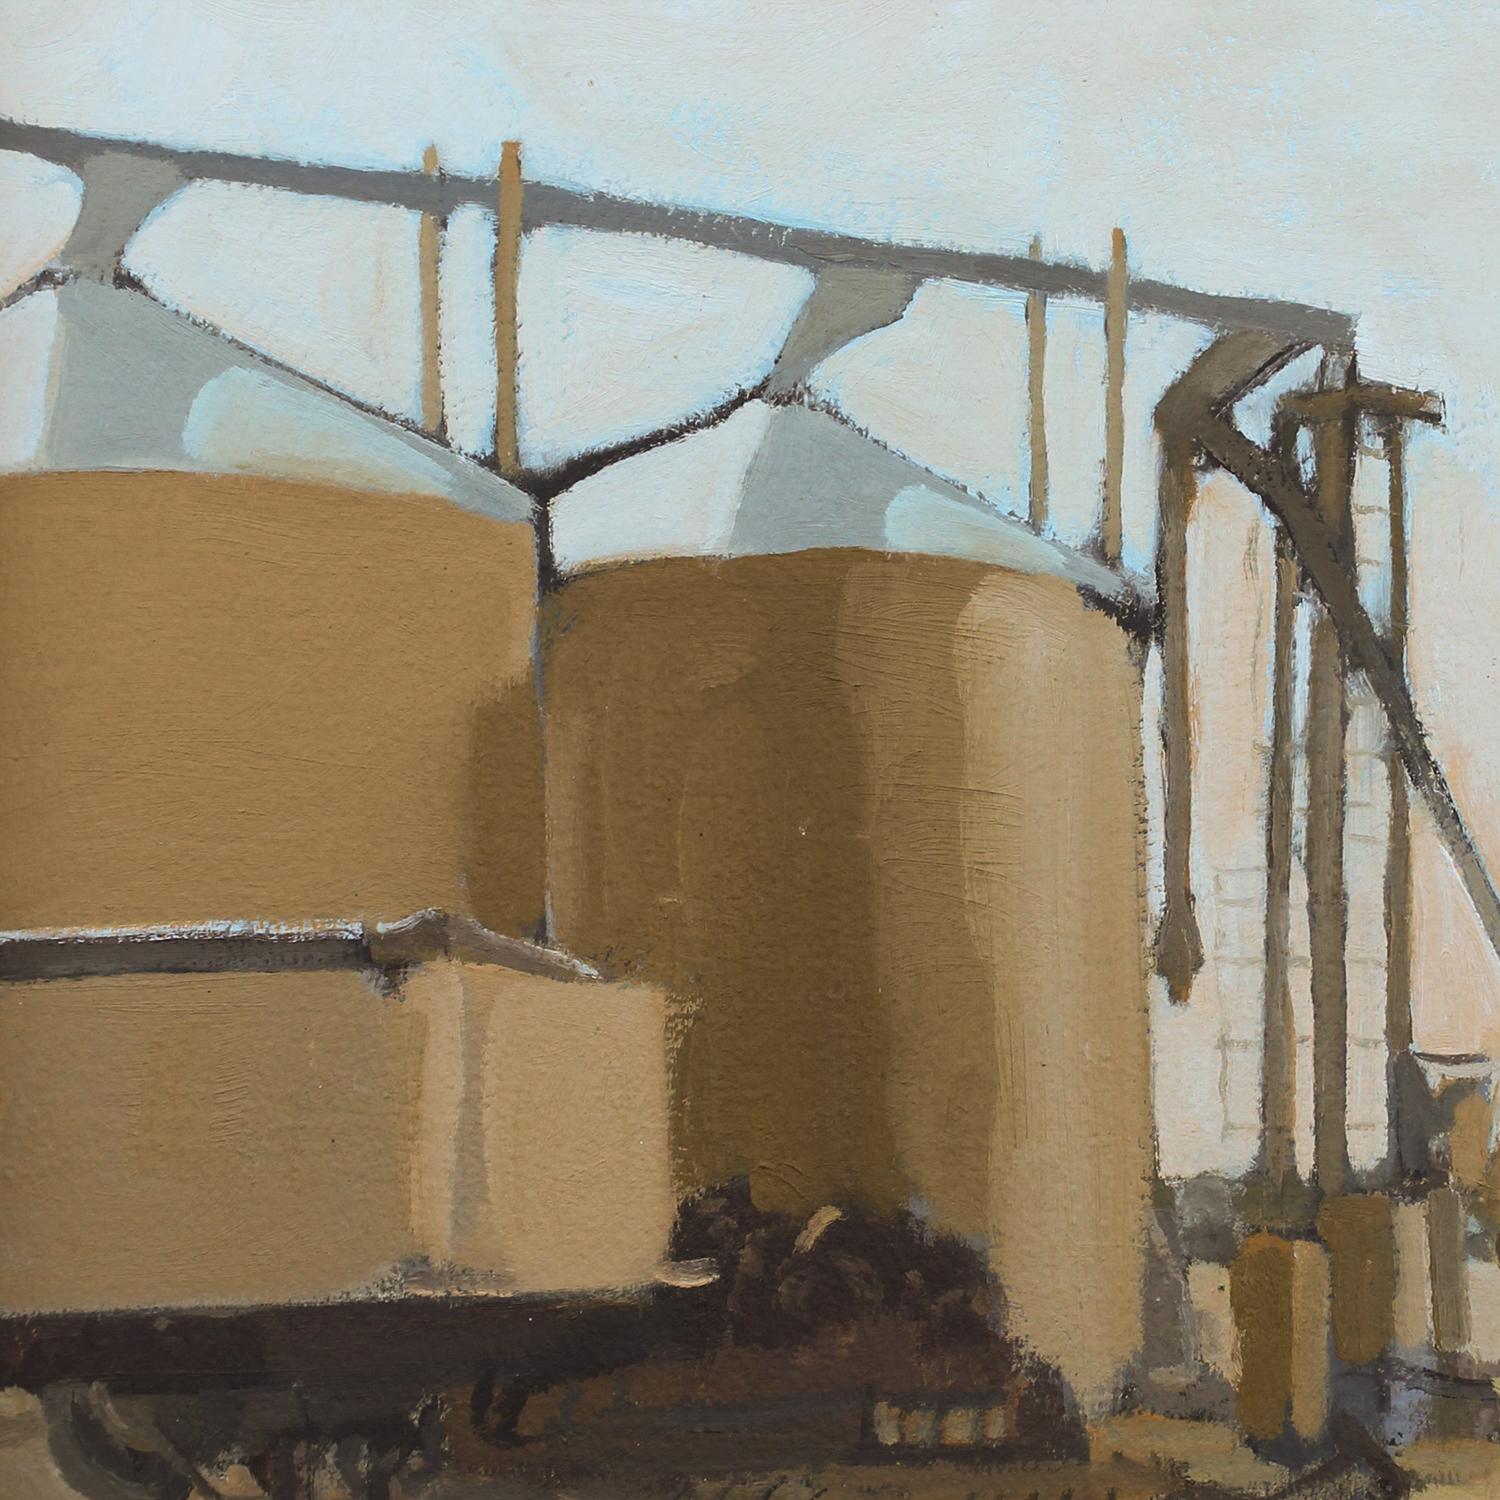 'Inglewood 6-12-2020' - plein air landscape - architectural painting  - Painting by Kathryn Keller